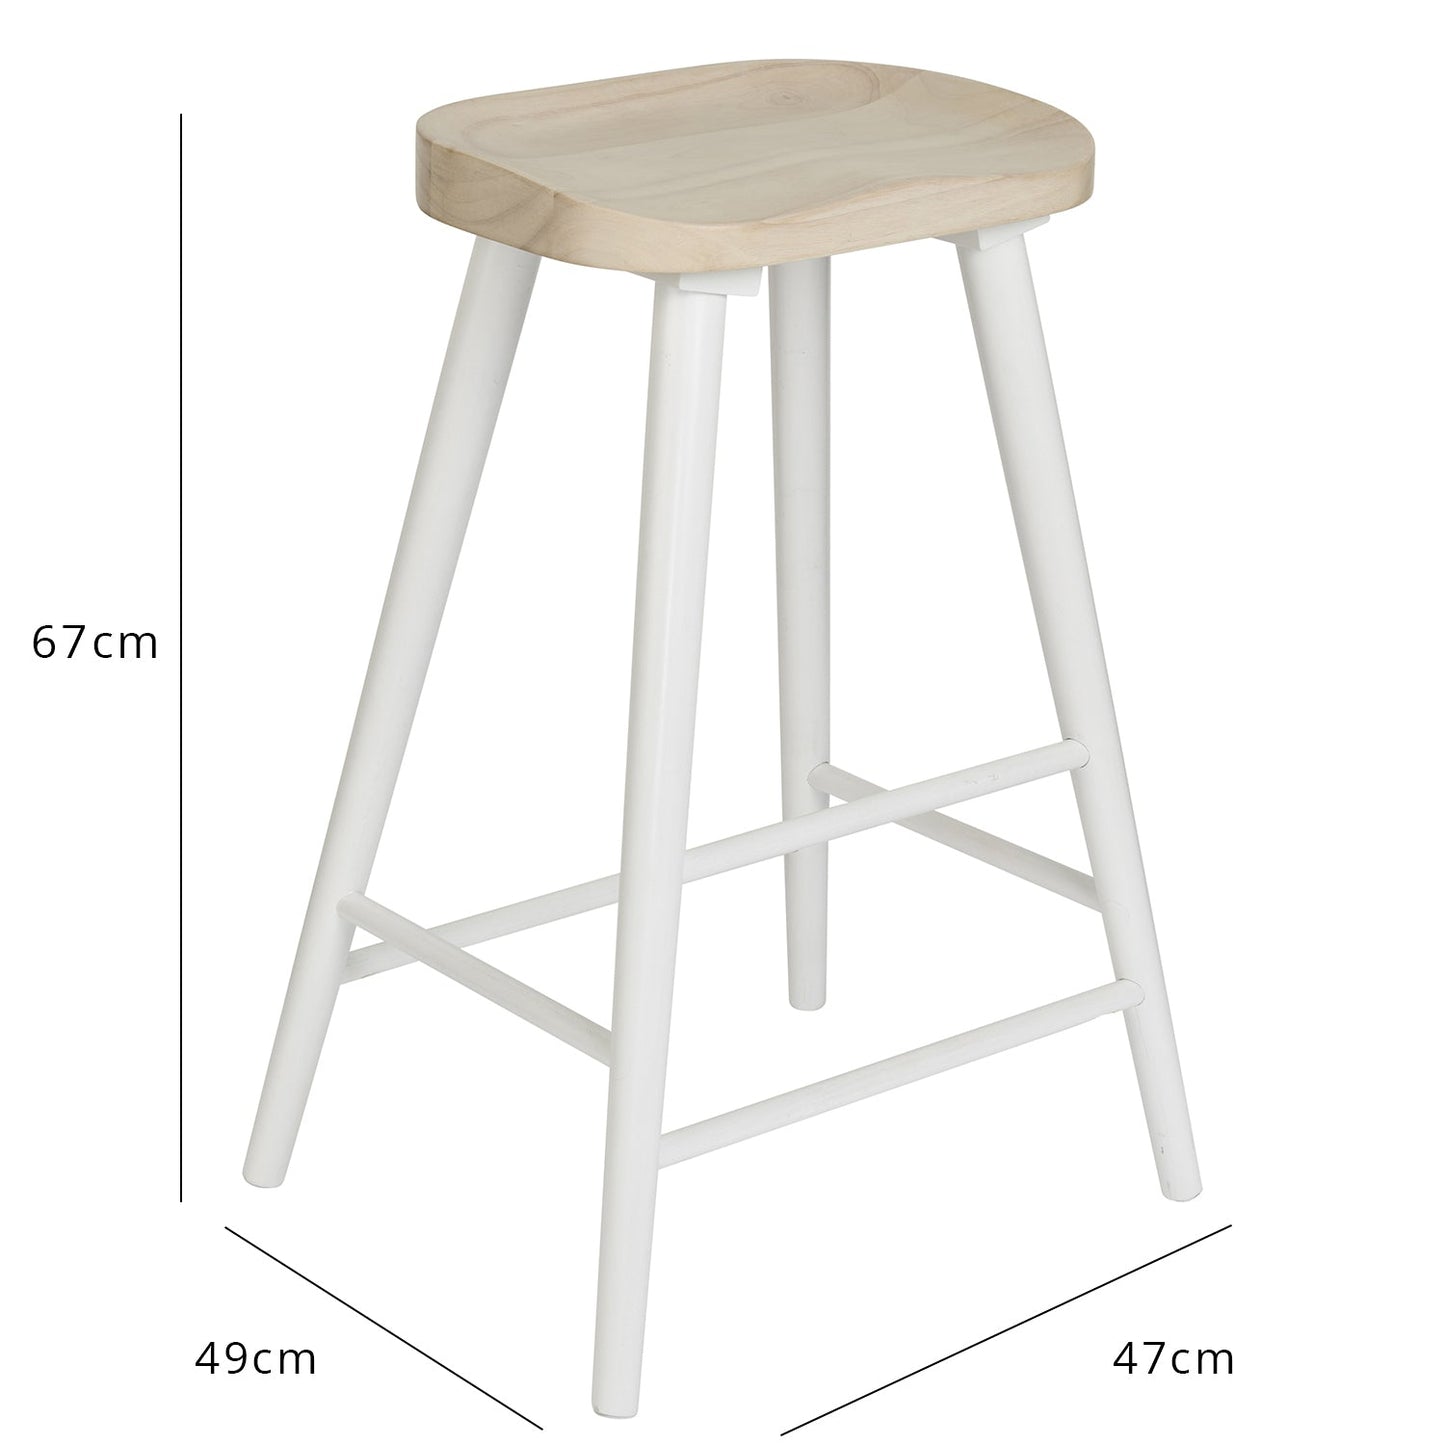 Silvester bar stool - white frame with whitewash top